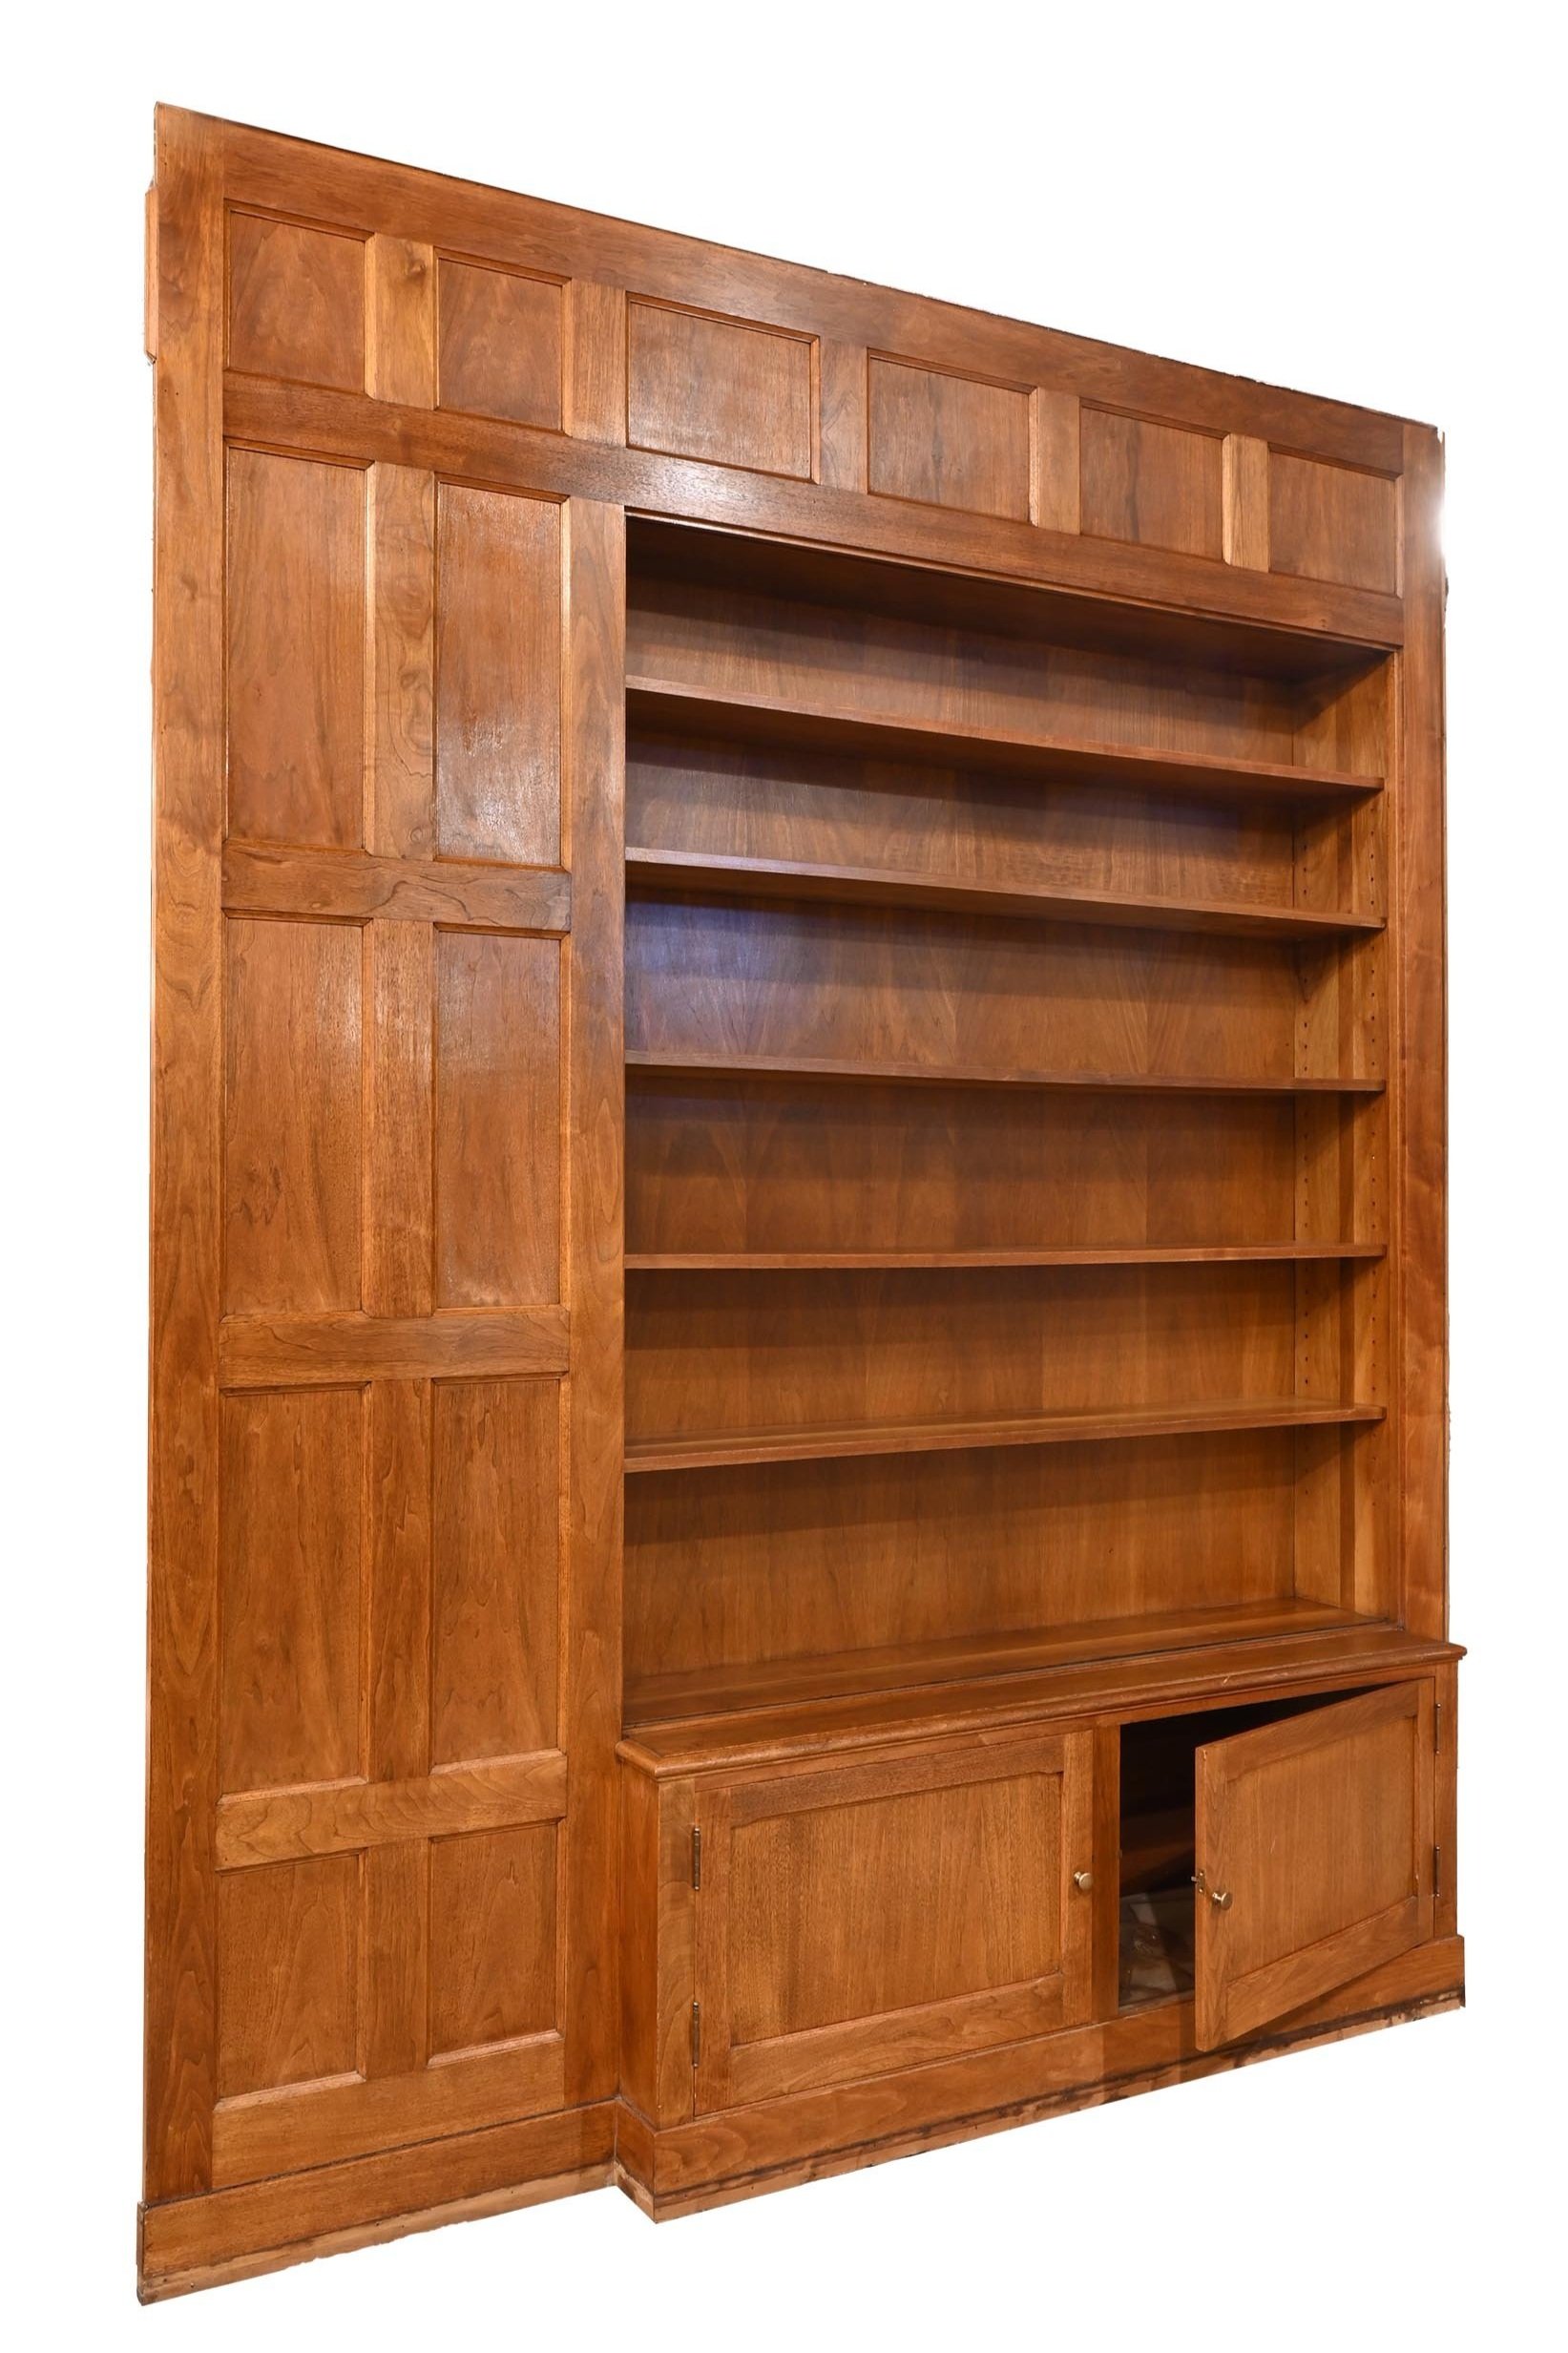 butternut bookcase with cabinet &amp; inlaid panel surround